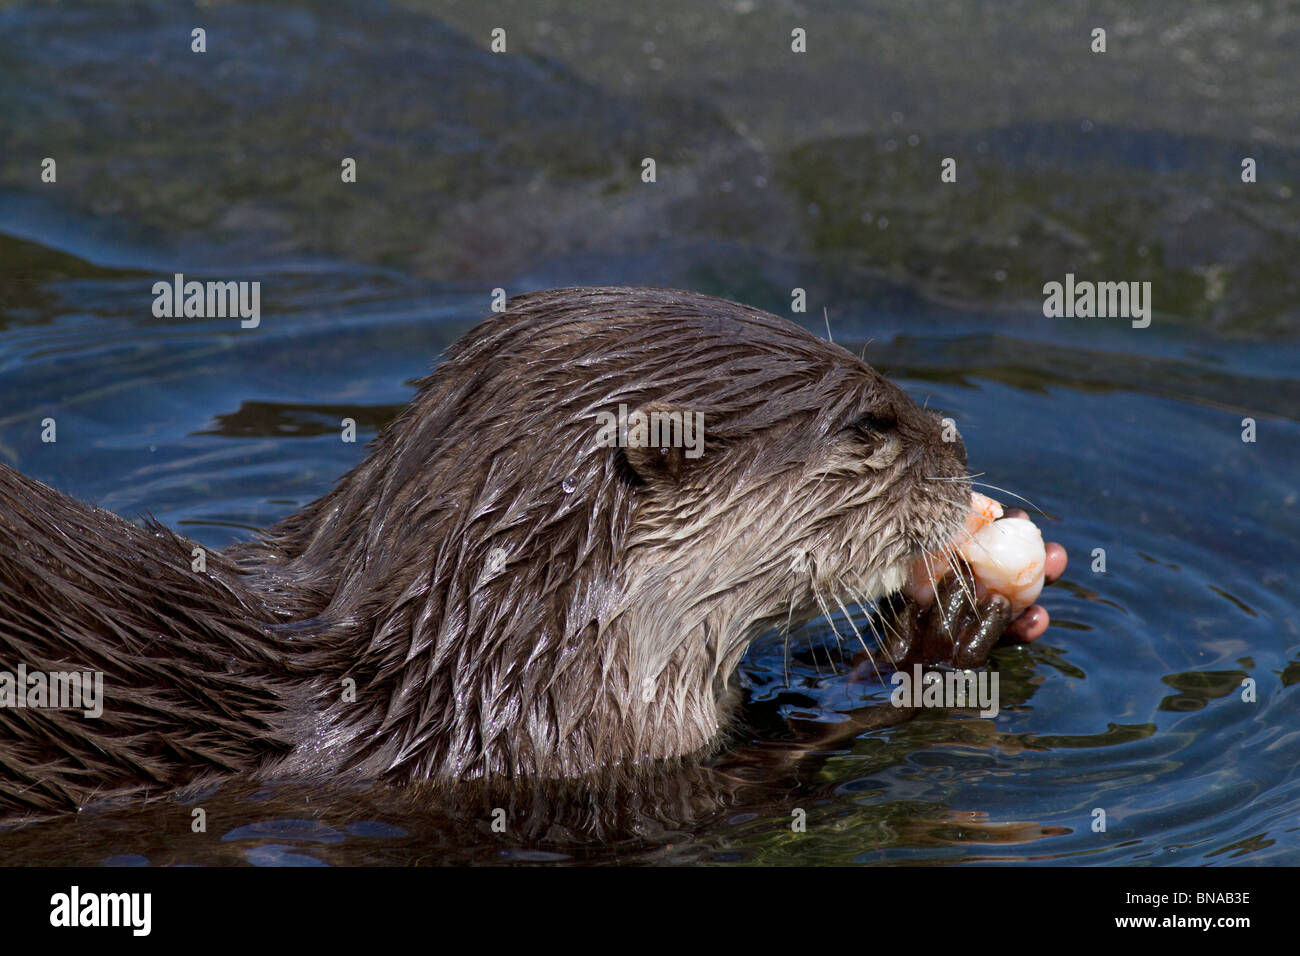 Oriental Small-clawed Otter Stock Photo